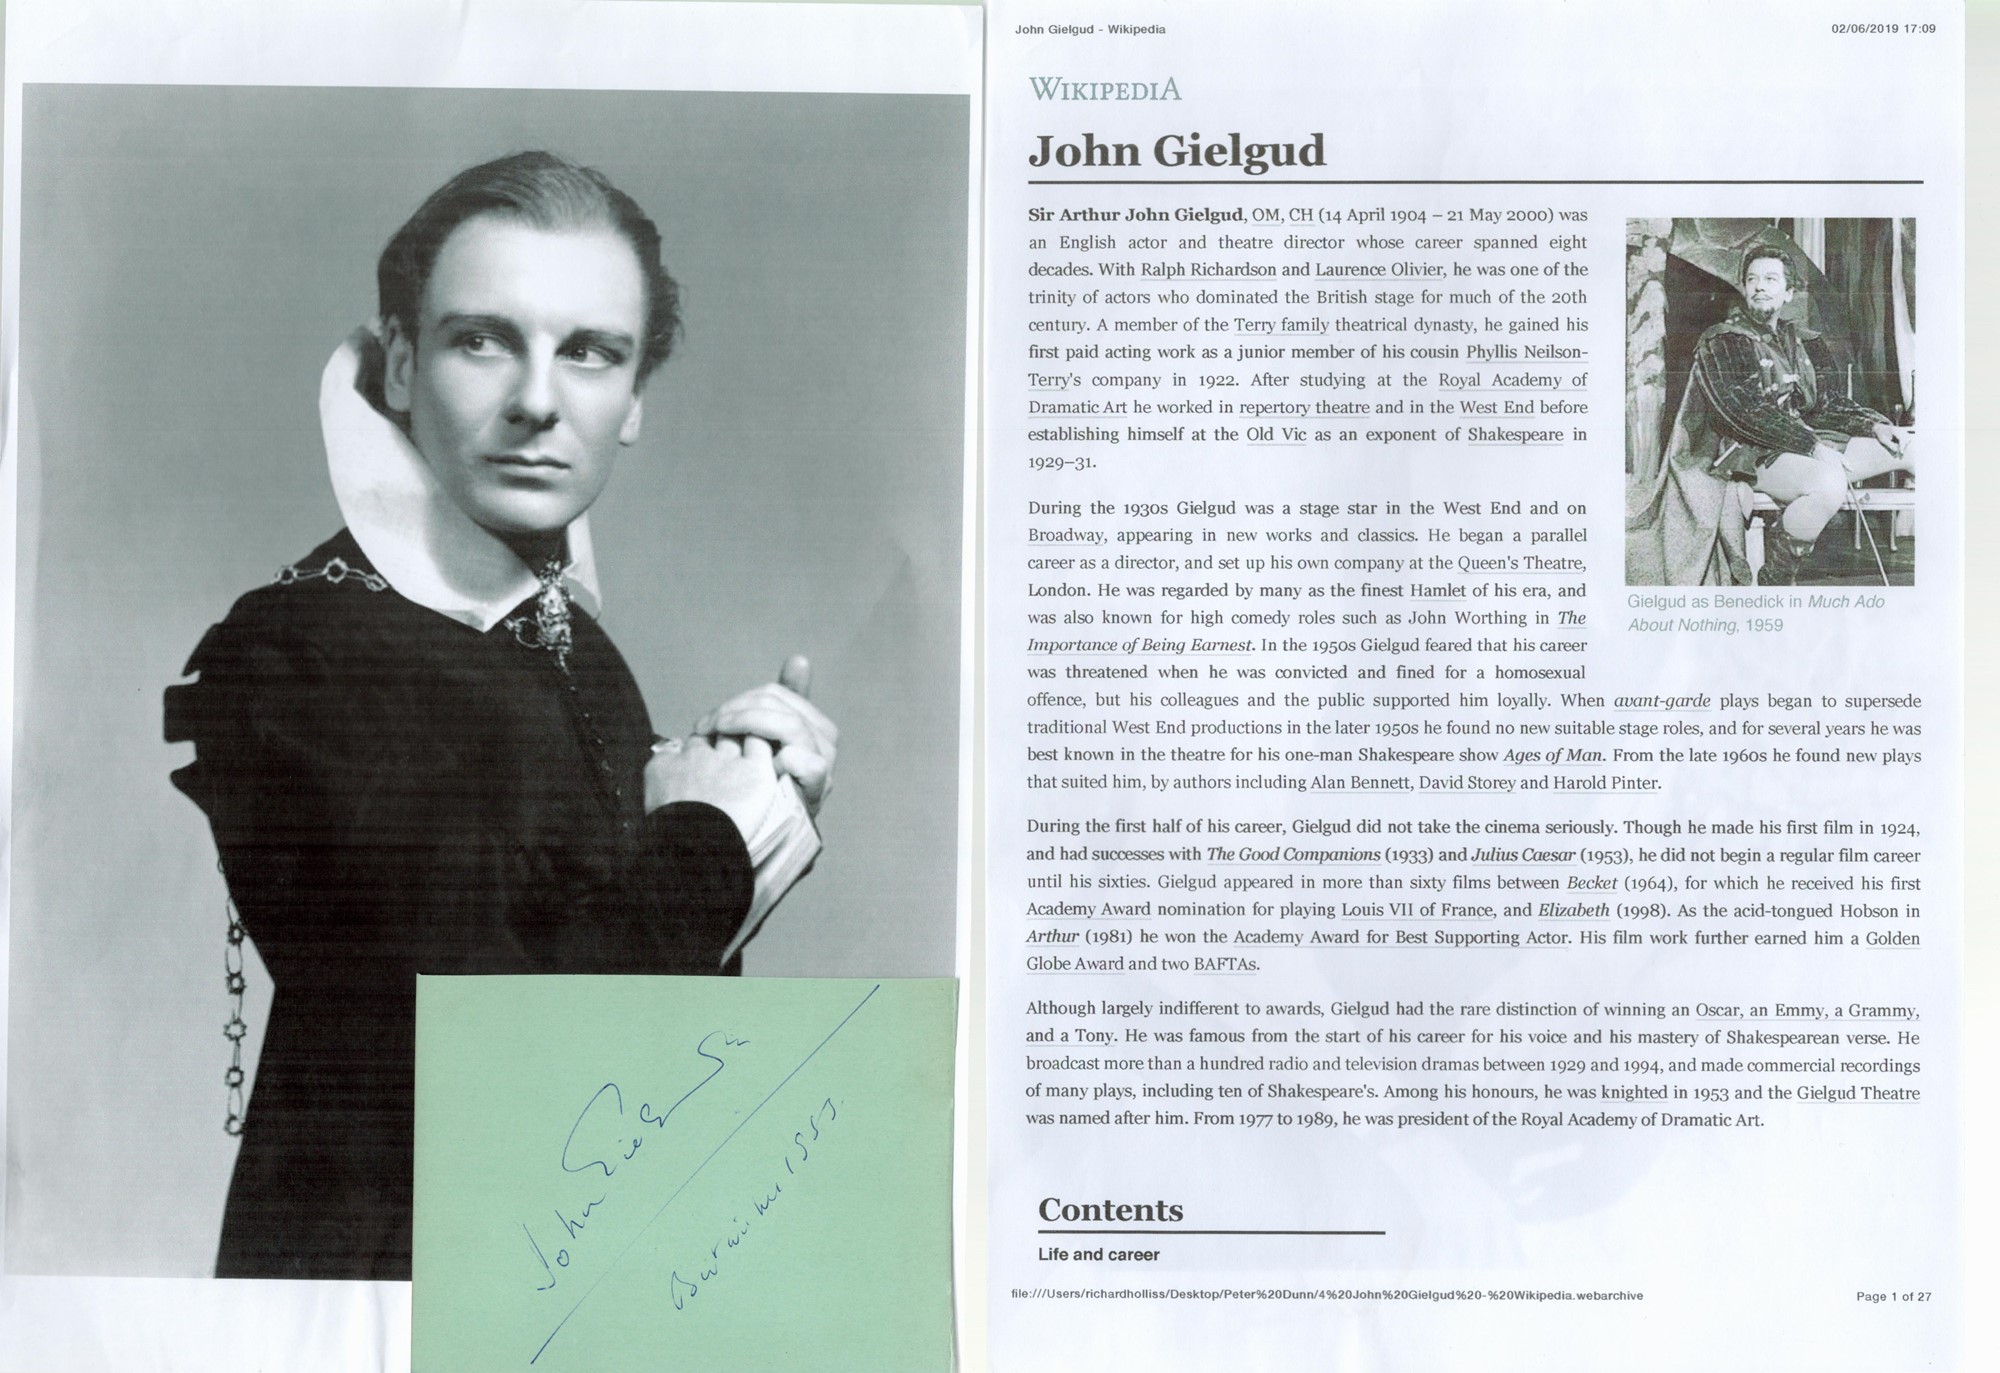 John Gielgud signed 5x3 Album Page. Gielgud, OM, CH was an English actor and theatre director